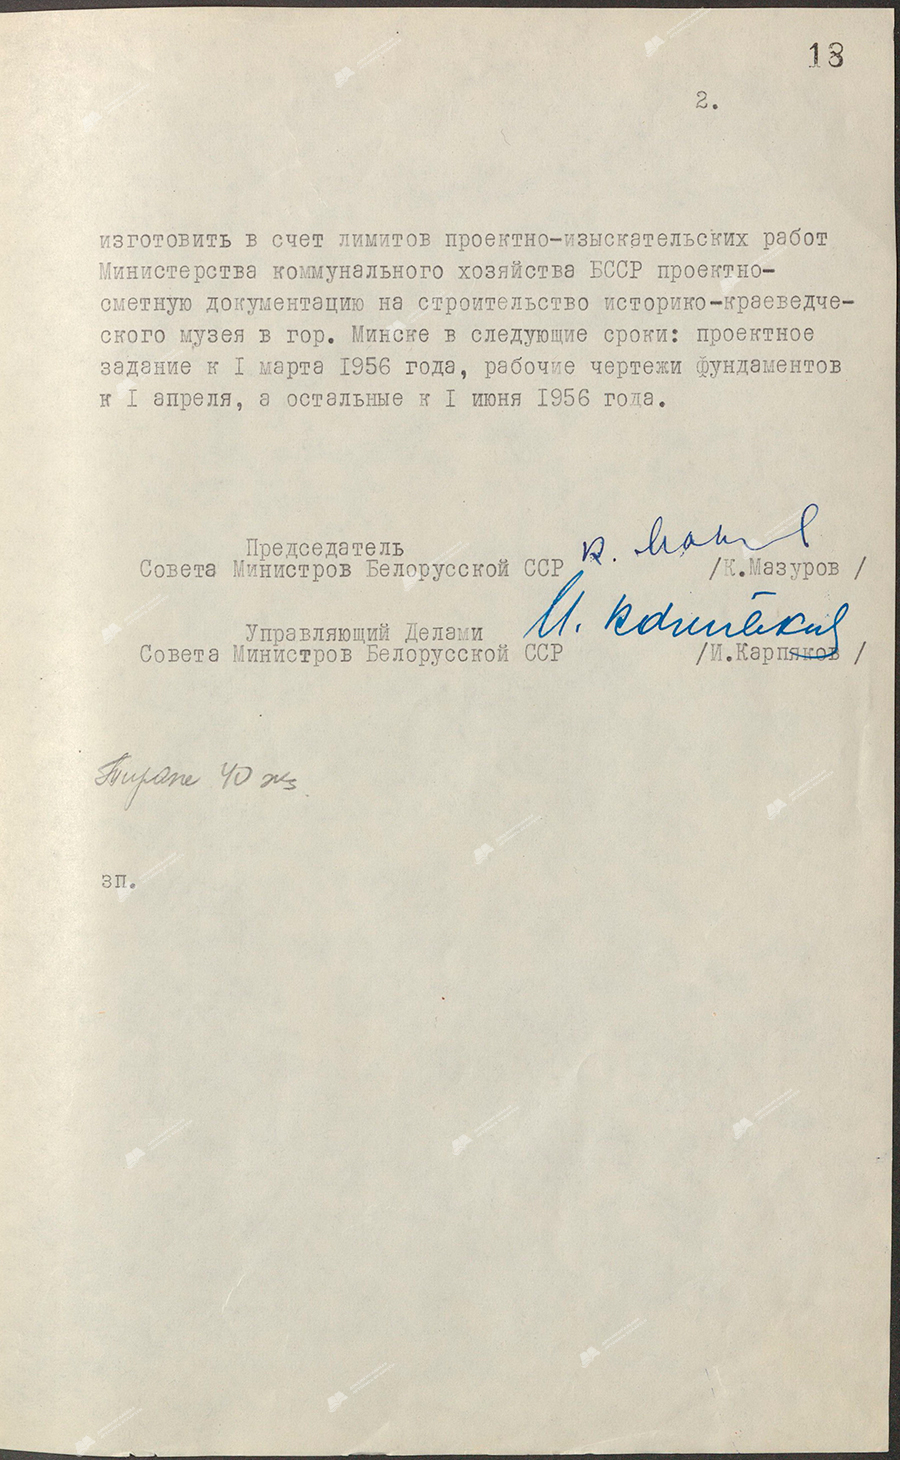 Resolution No. 4 of the Council of Ministers of the Byelorussian SSR «On construction in the city. Minsk Museum of History and Local Lore»-с. 2